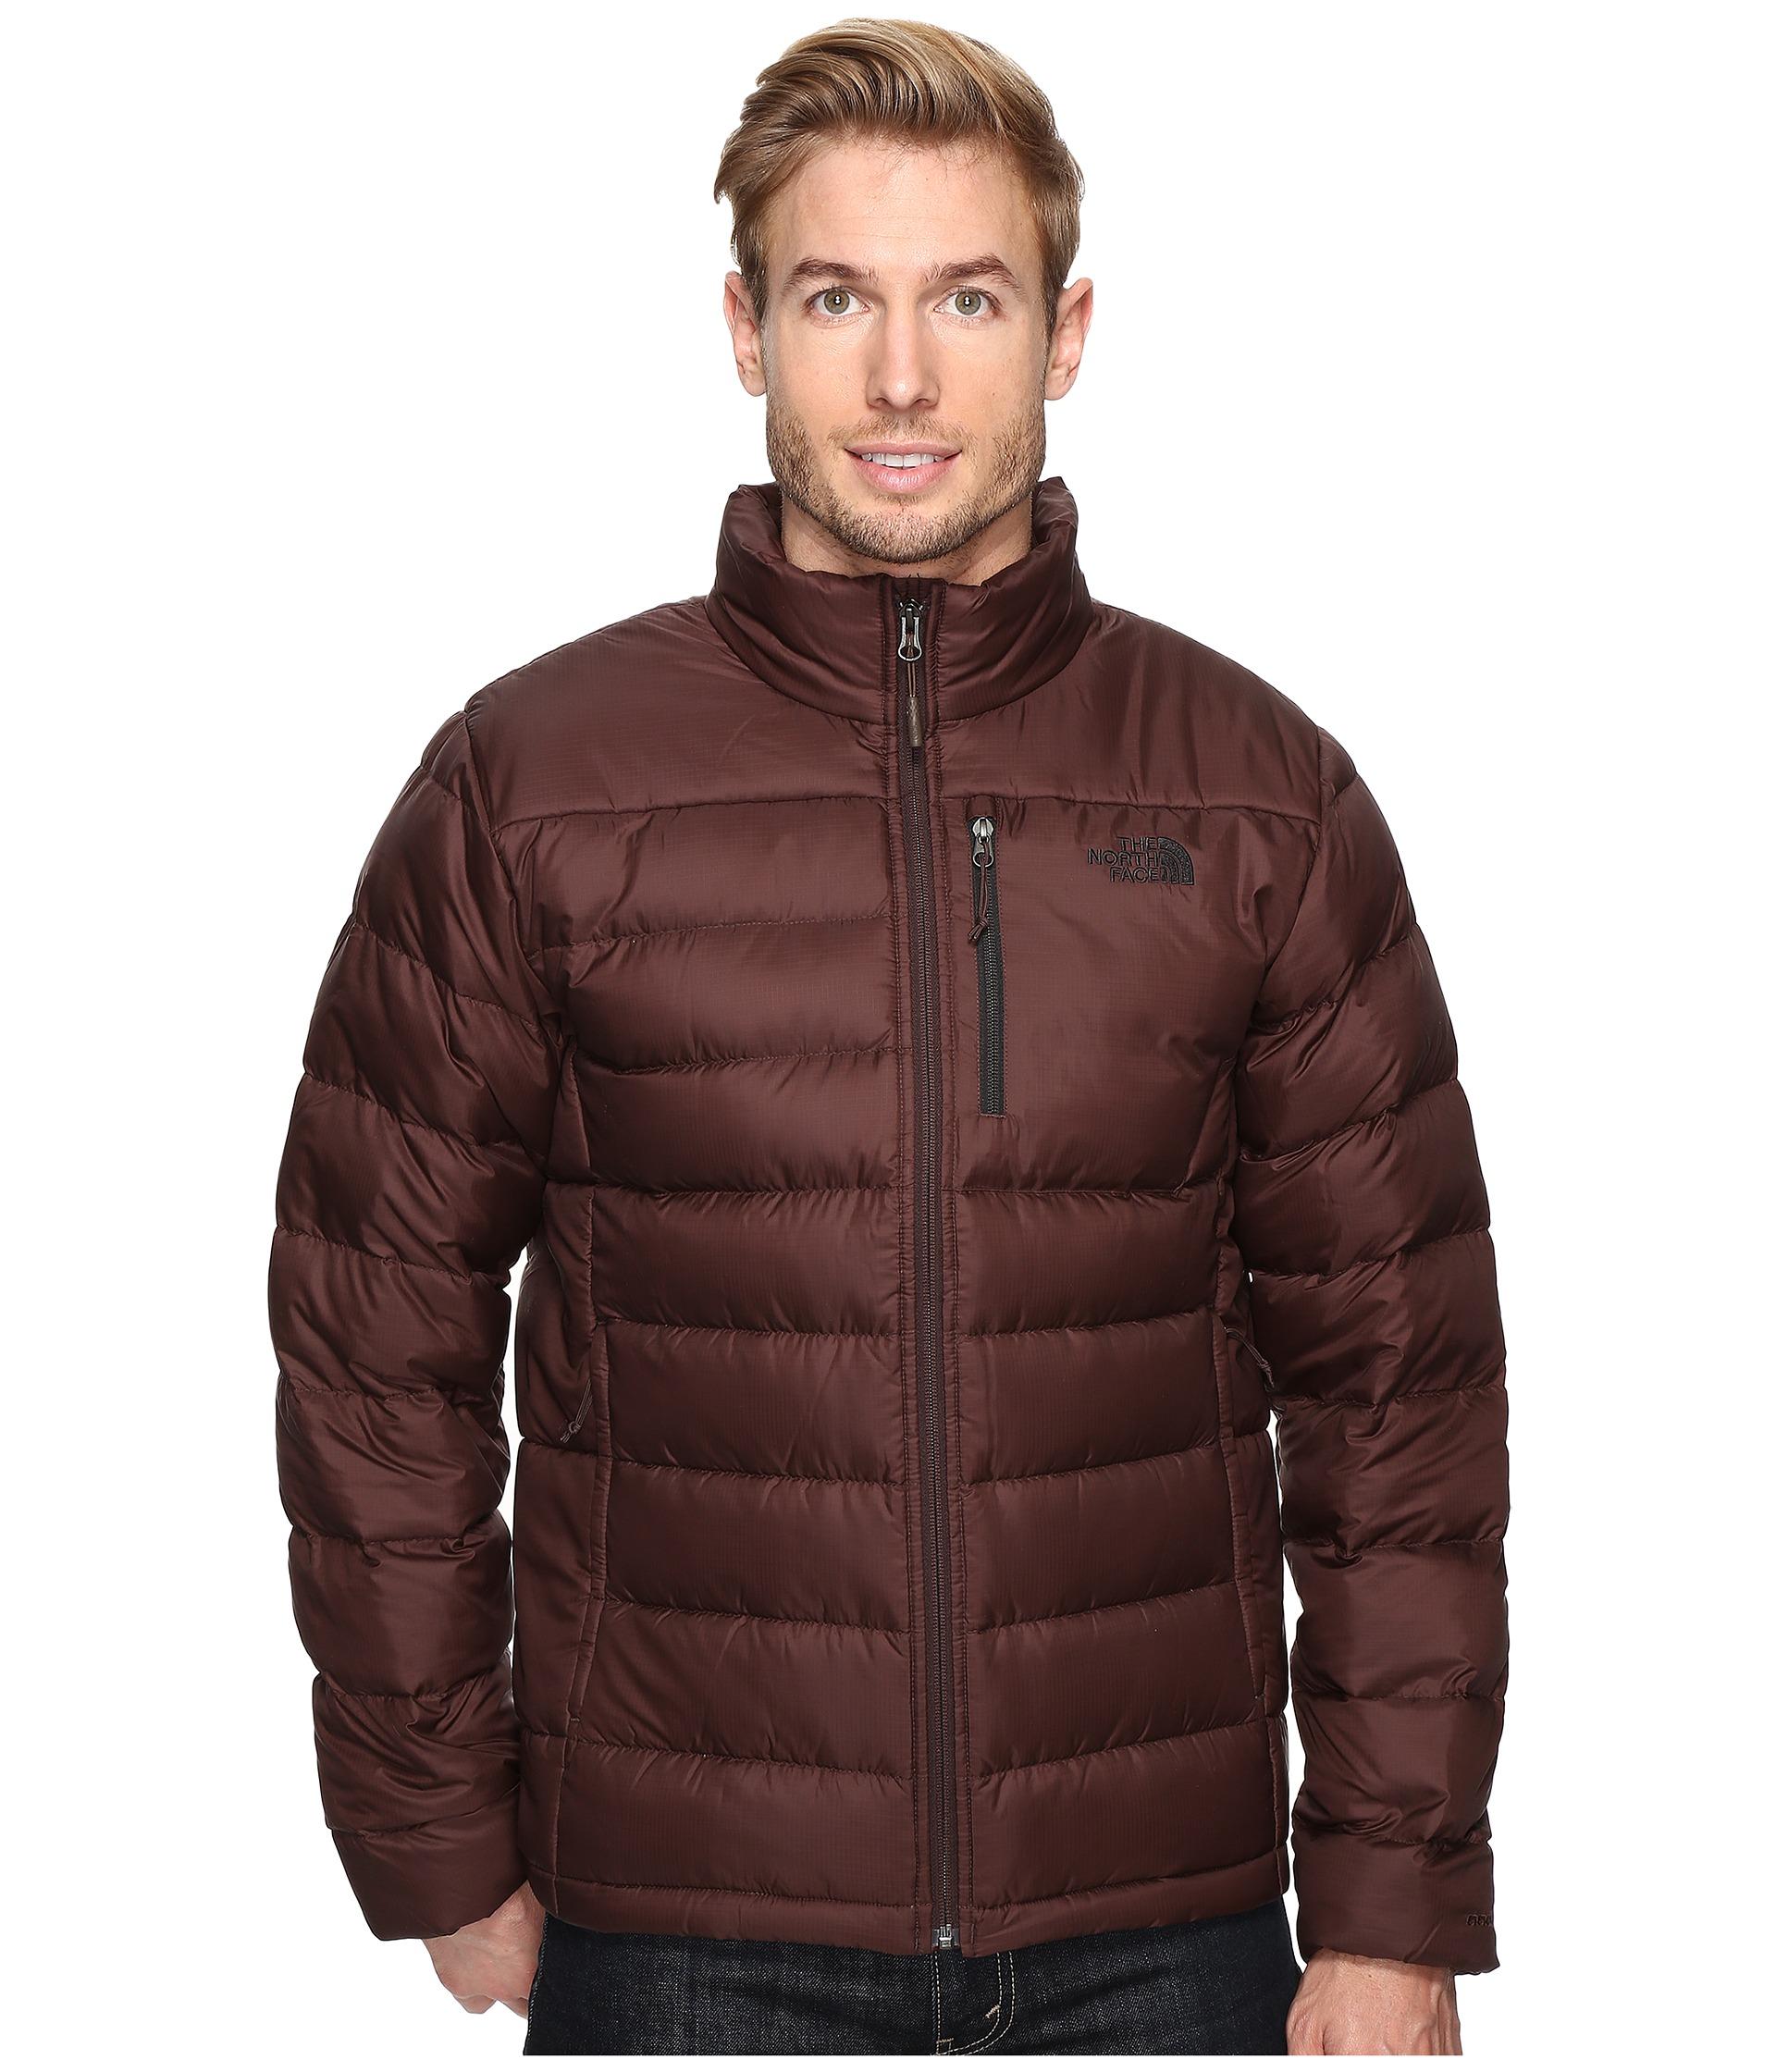 Lyst - The north face Aconcagua Jacket in Brown for Men